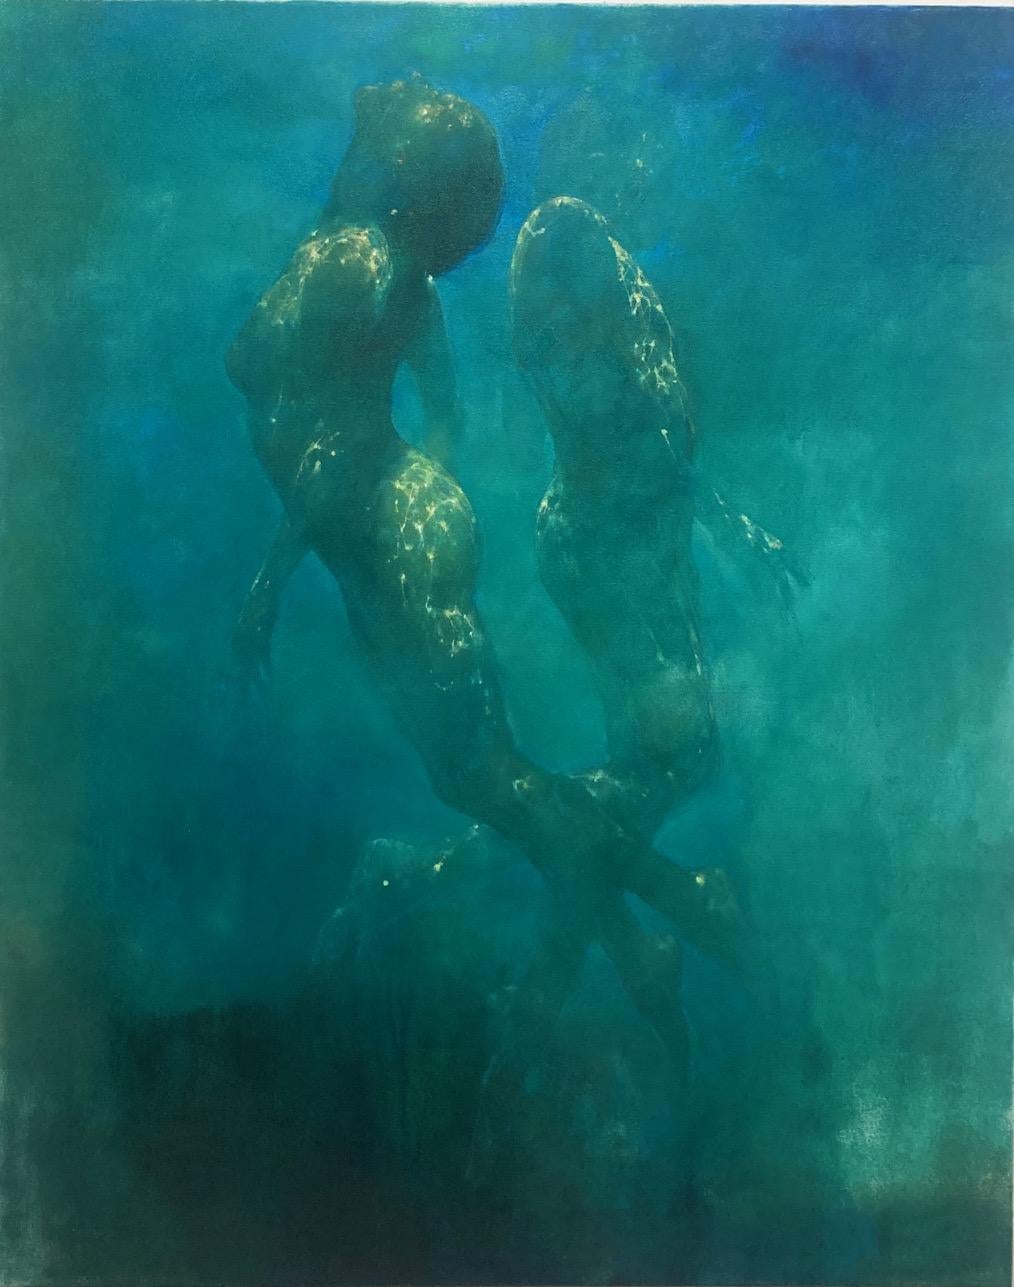  Ocean Whispers - abstract art underwater nude human figurative painting